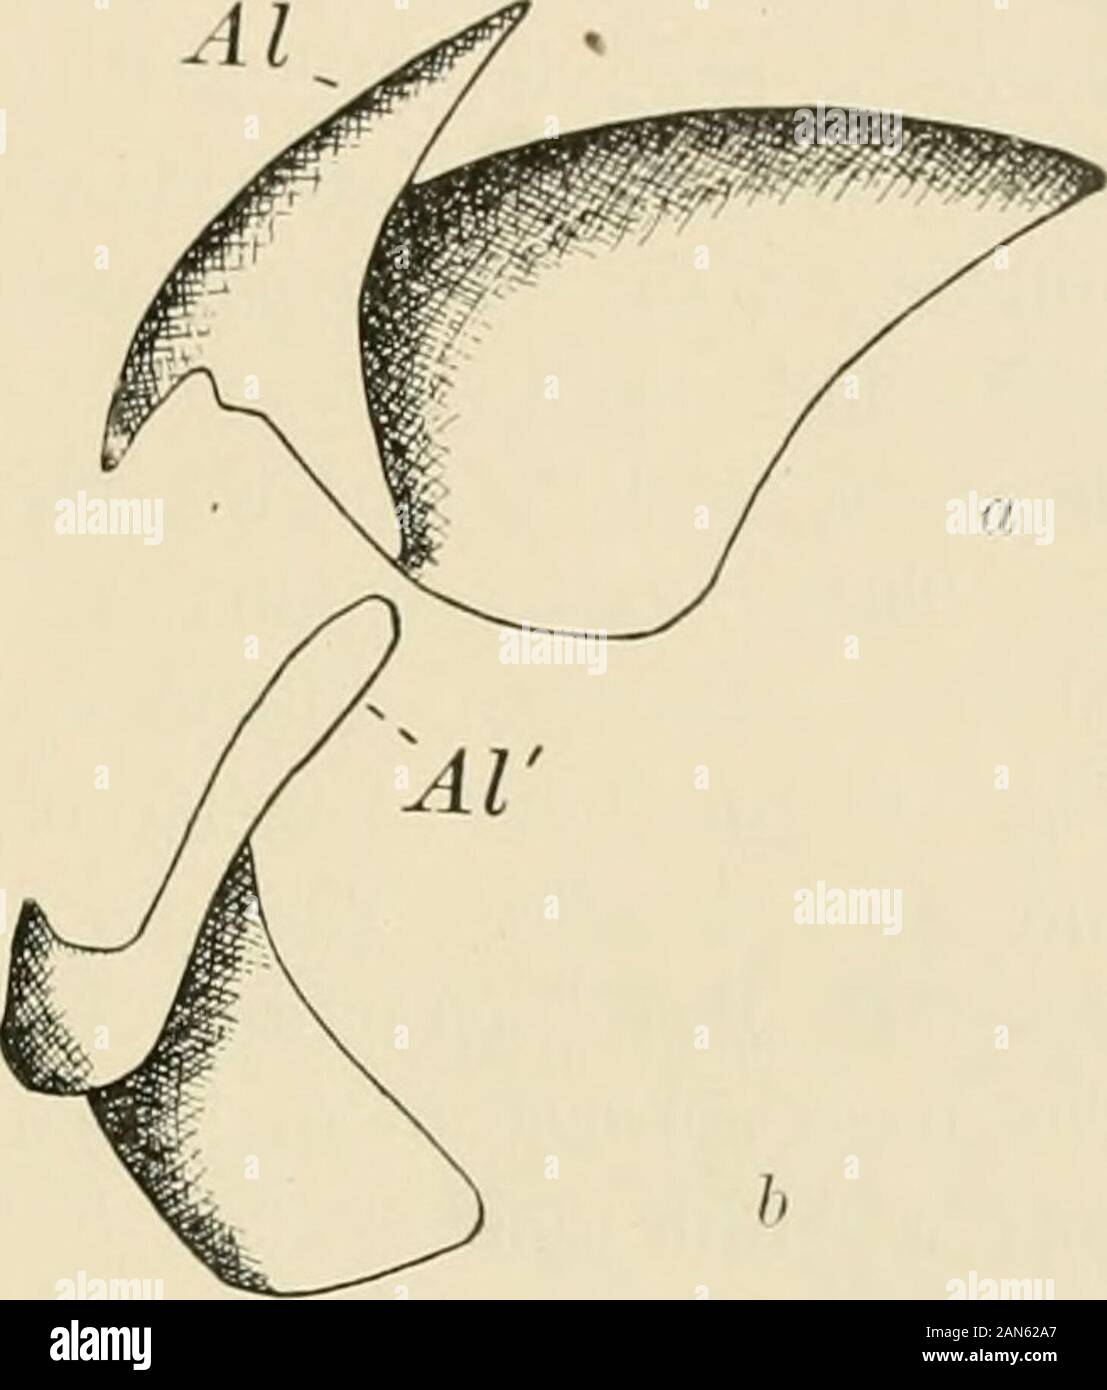 The anatomy of the common squid, Loligo pealii, Lesueur . sthe upper but is less compressed and morecurved so that it fits over the distal end of theinner mandil^le. The inner lamella has muchthe same shape and size as the outer lamella ofthe upper jaw; the outer lamella of this jaw,is a long, broad band which extends backw^ardparallel to the edge of the jaw and forms apair of prominent wings, the alae. The upperjaw is comparatively fixed while the lower rotatesthru an angle of 45° about an axis which passesalmost thru the middle of each side of theinner lamella of the upper jaw. The muscularf Stock Photo